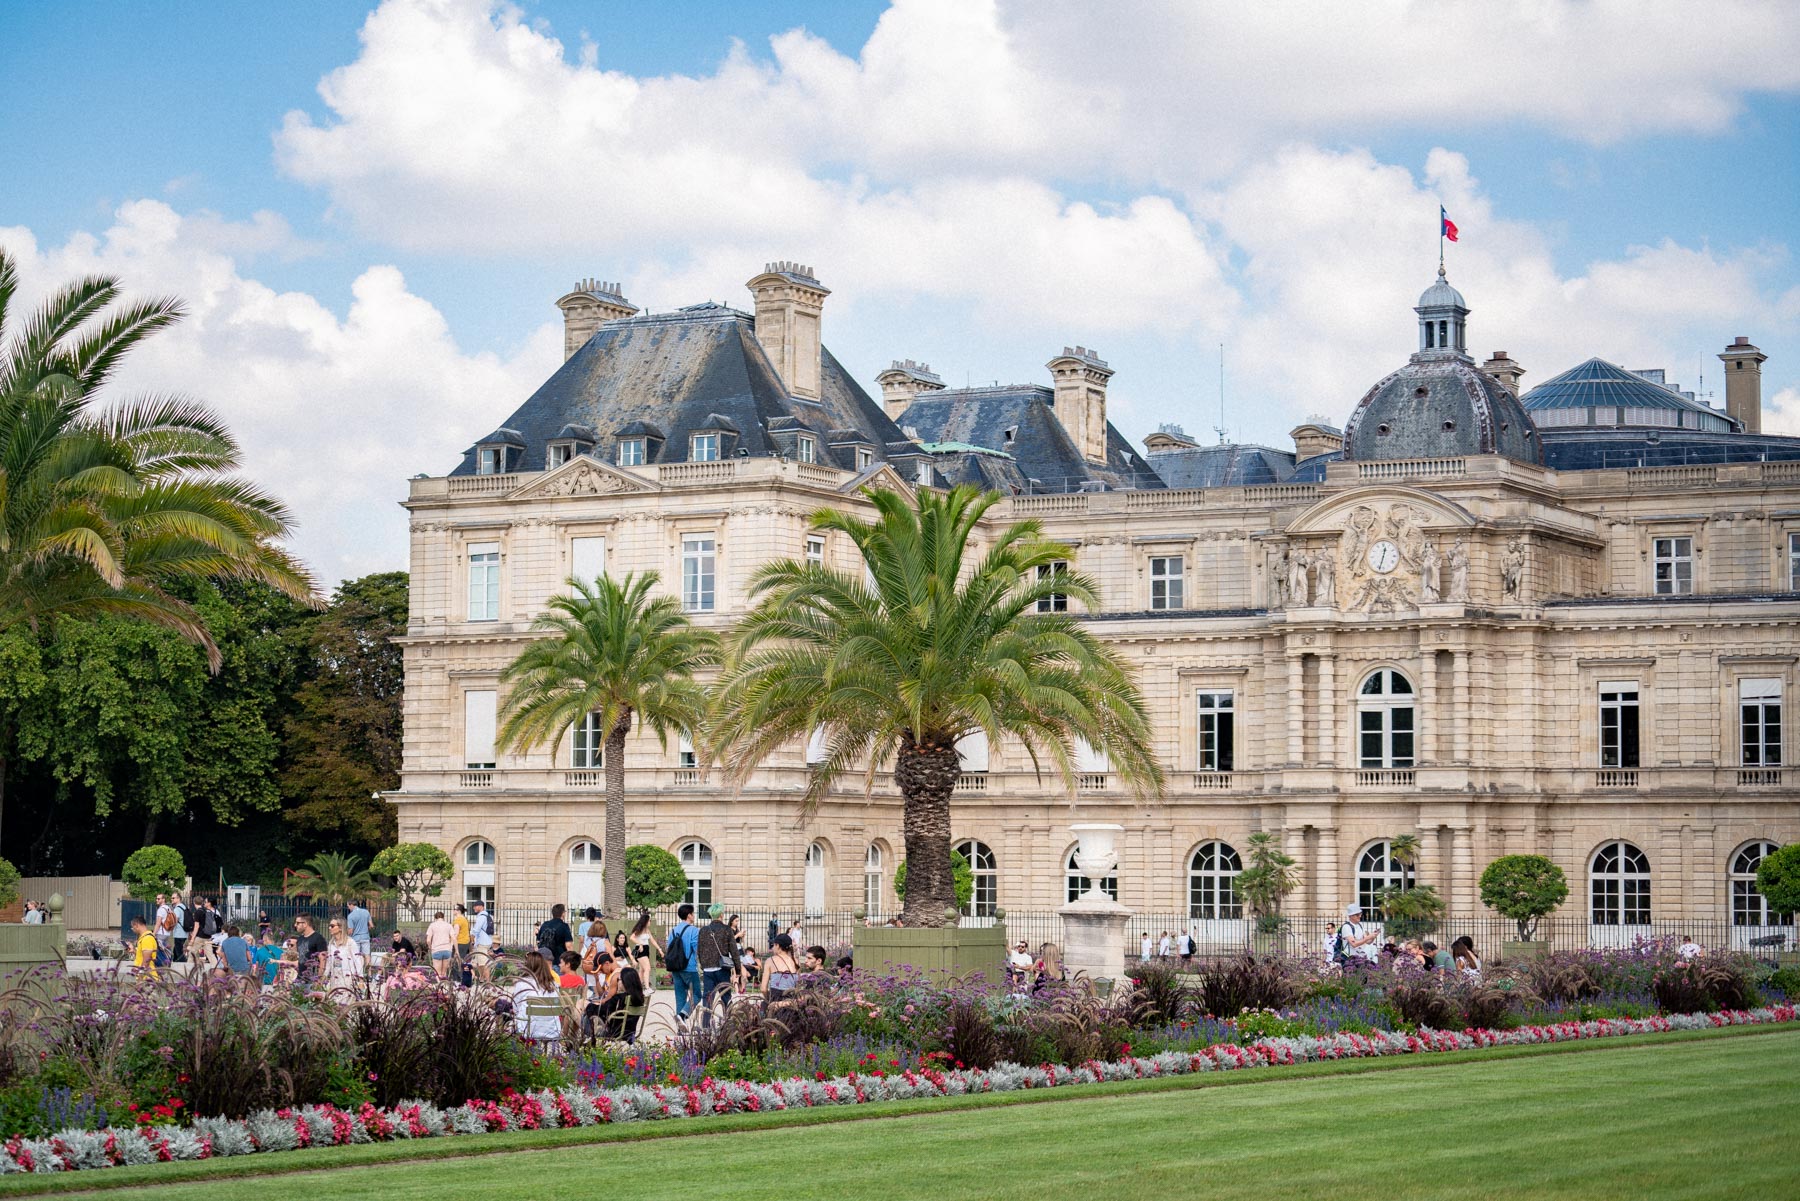 Luxembourg Gardens
Best things to do Paris